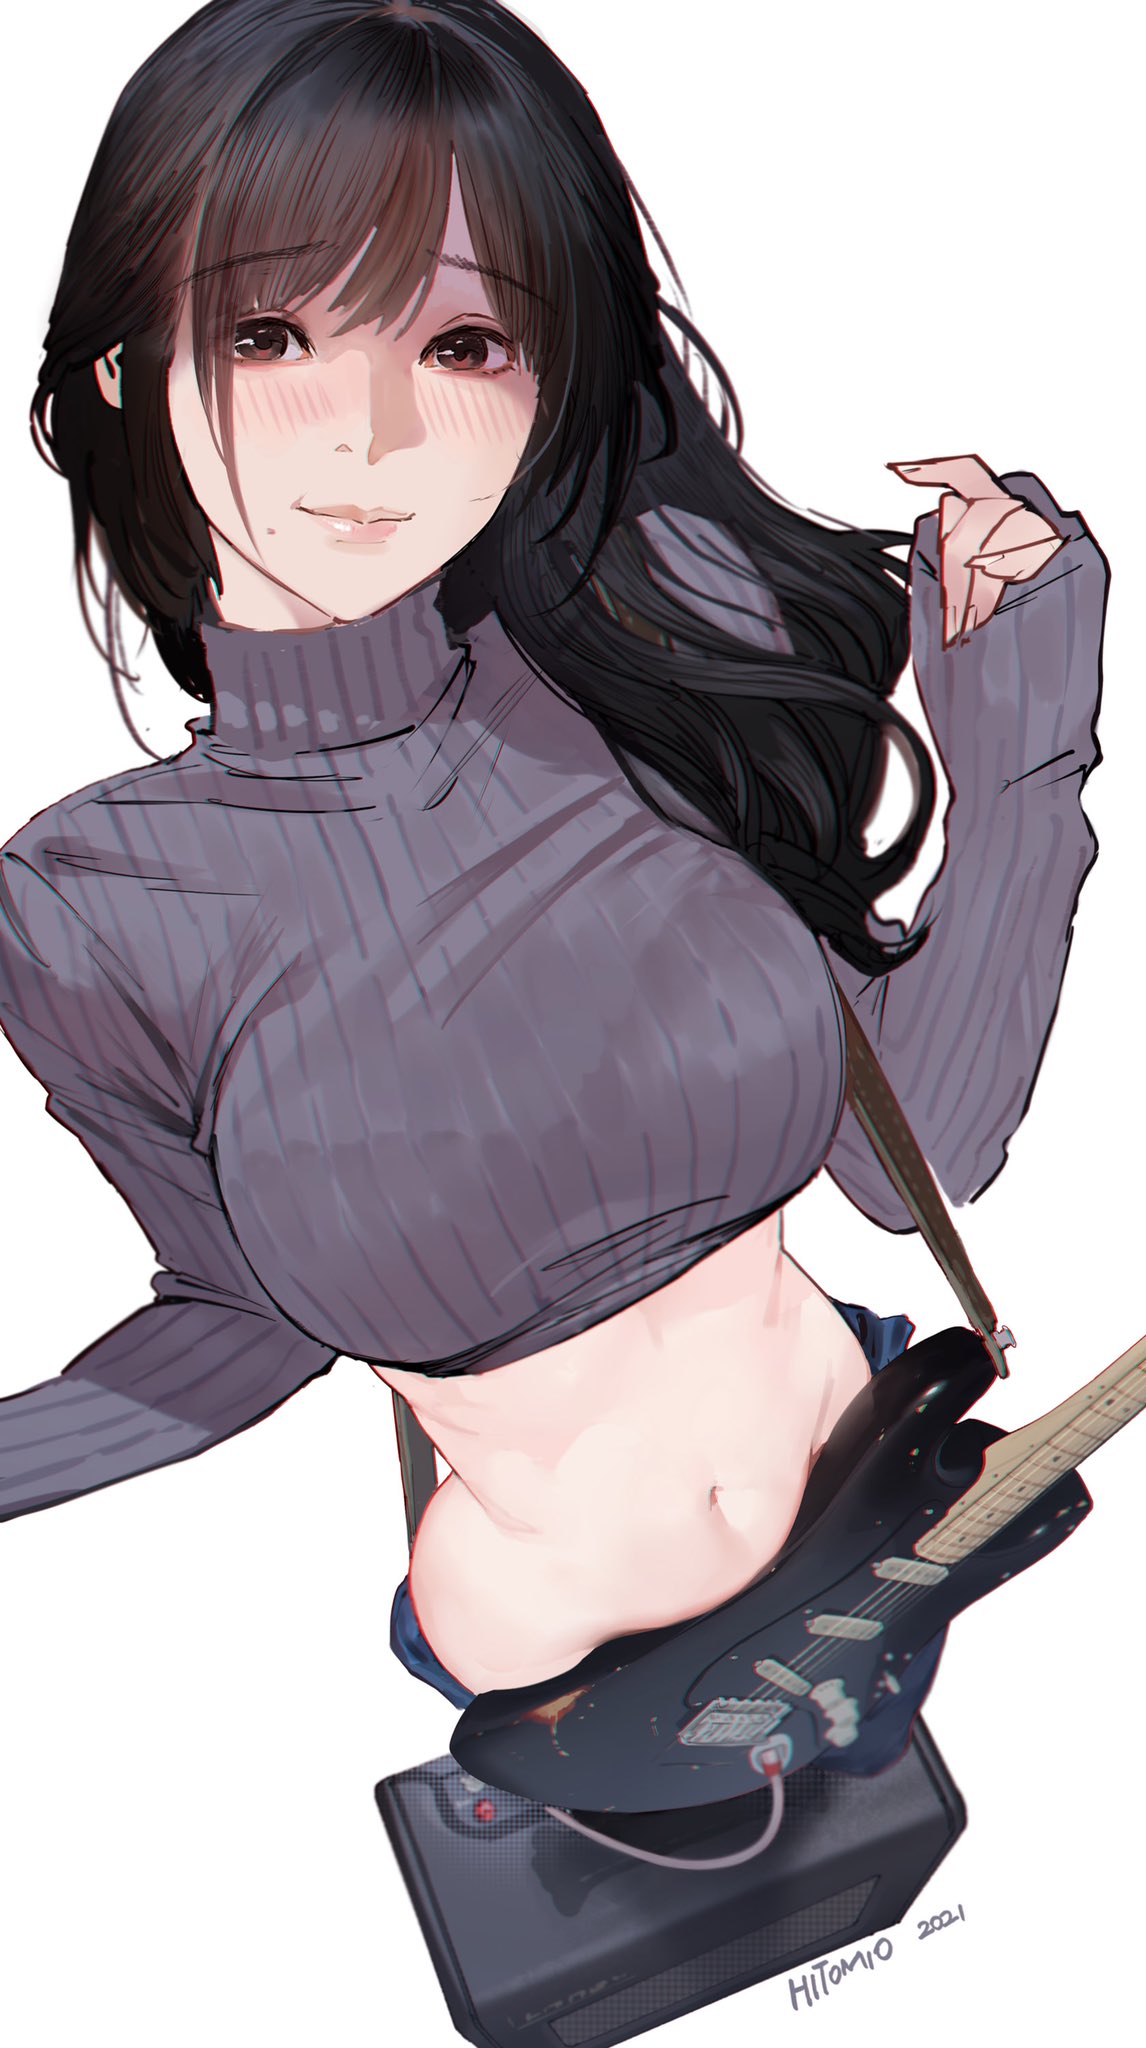 Anime 1146x2048 guitar anime girls dark hair sweater bare midriff belly artwork Hitomio crop top Fender amplifiers Guitar Sister (Hitomio) electric guitar Stratocaster